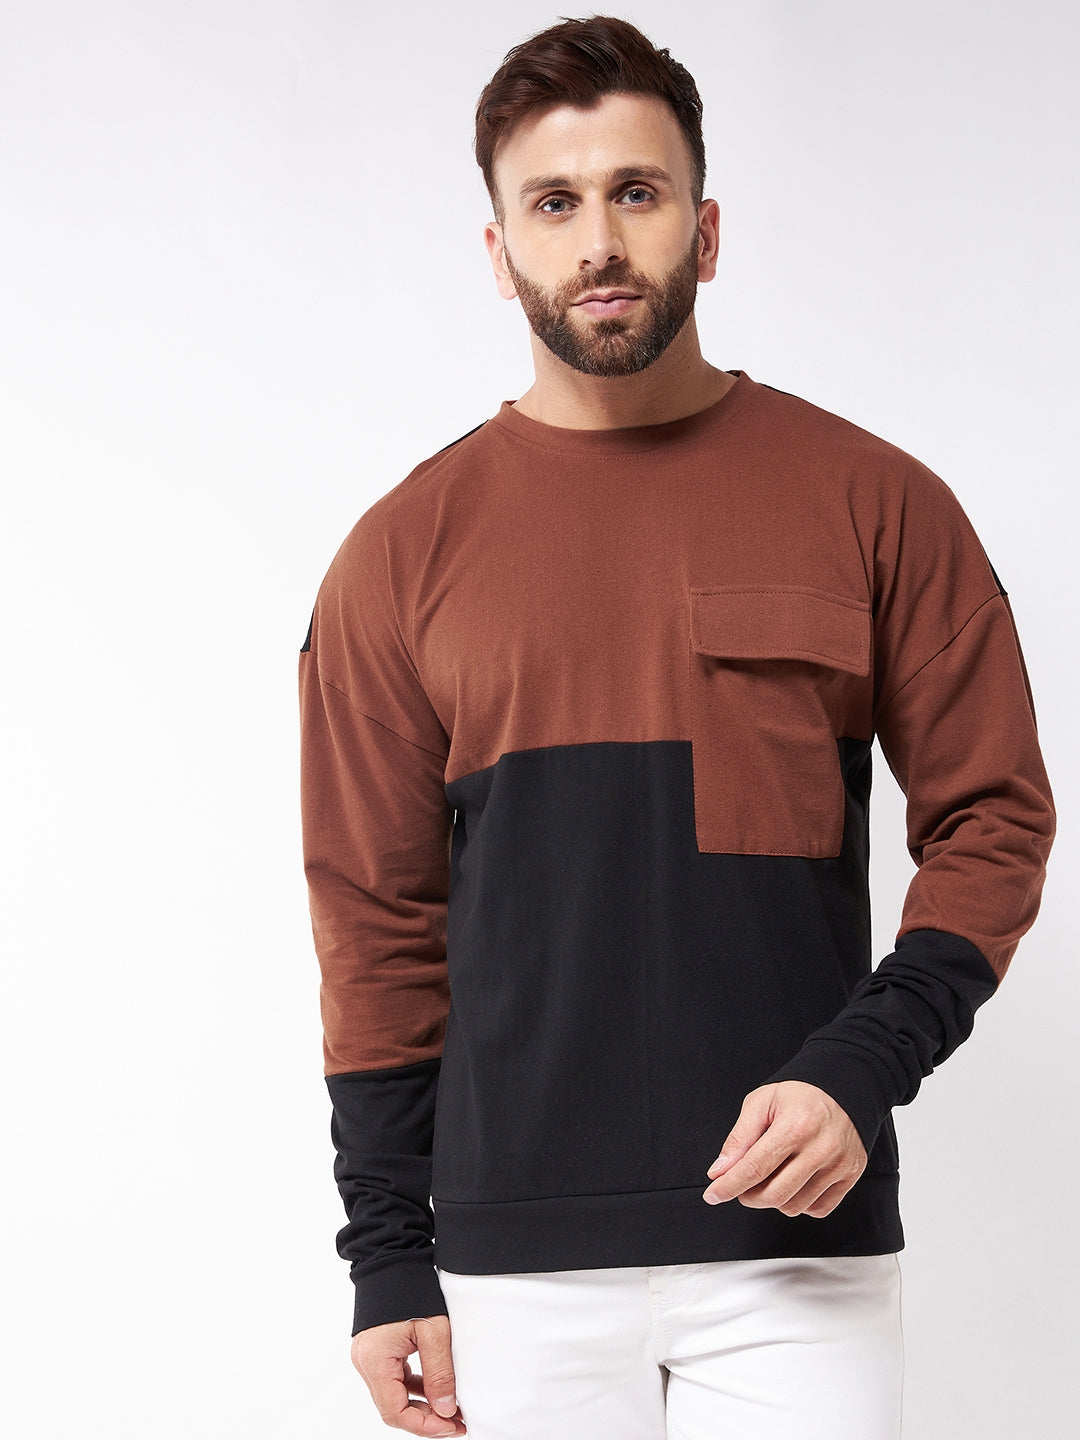 Oversized Black and Brown Full Sleeve  T-Shirt